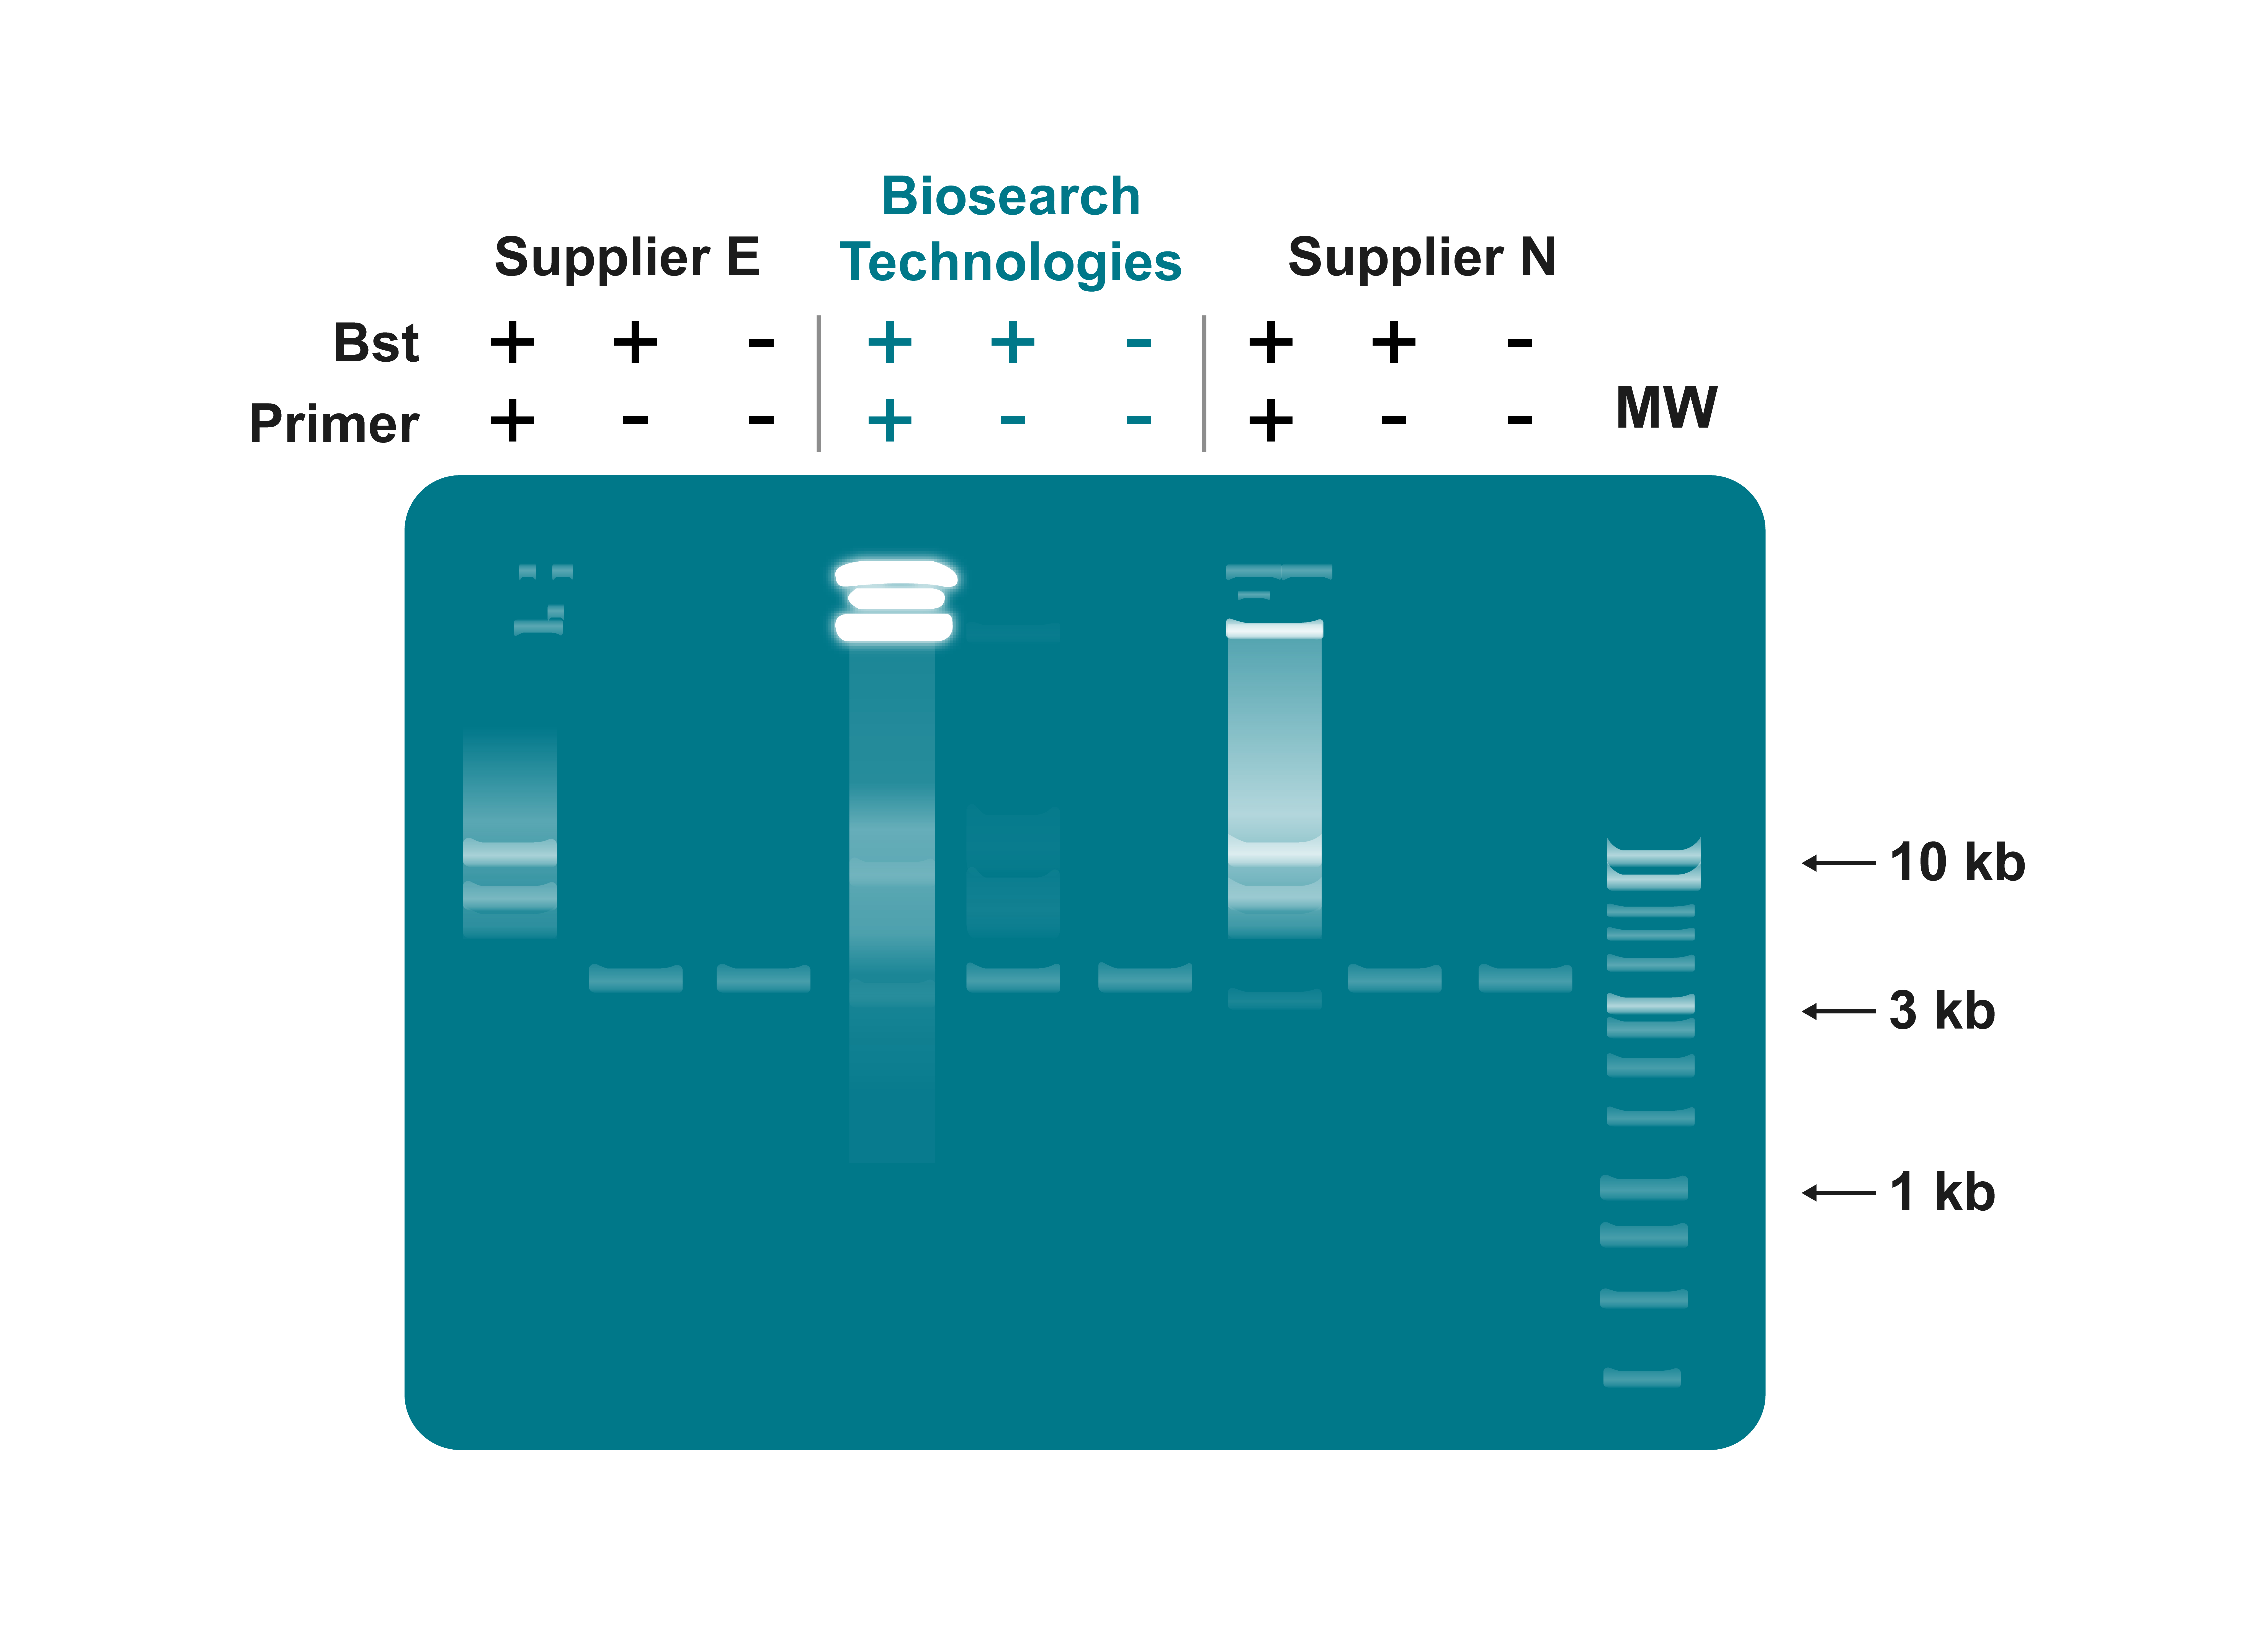 Bst DNA Polymerase, Exonuclease Minus, possesses greater strand-displacing polymerase activity.